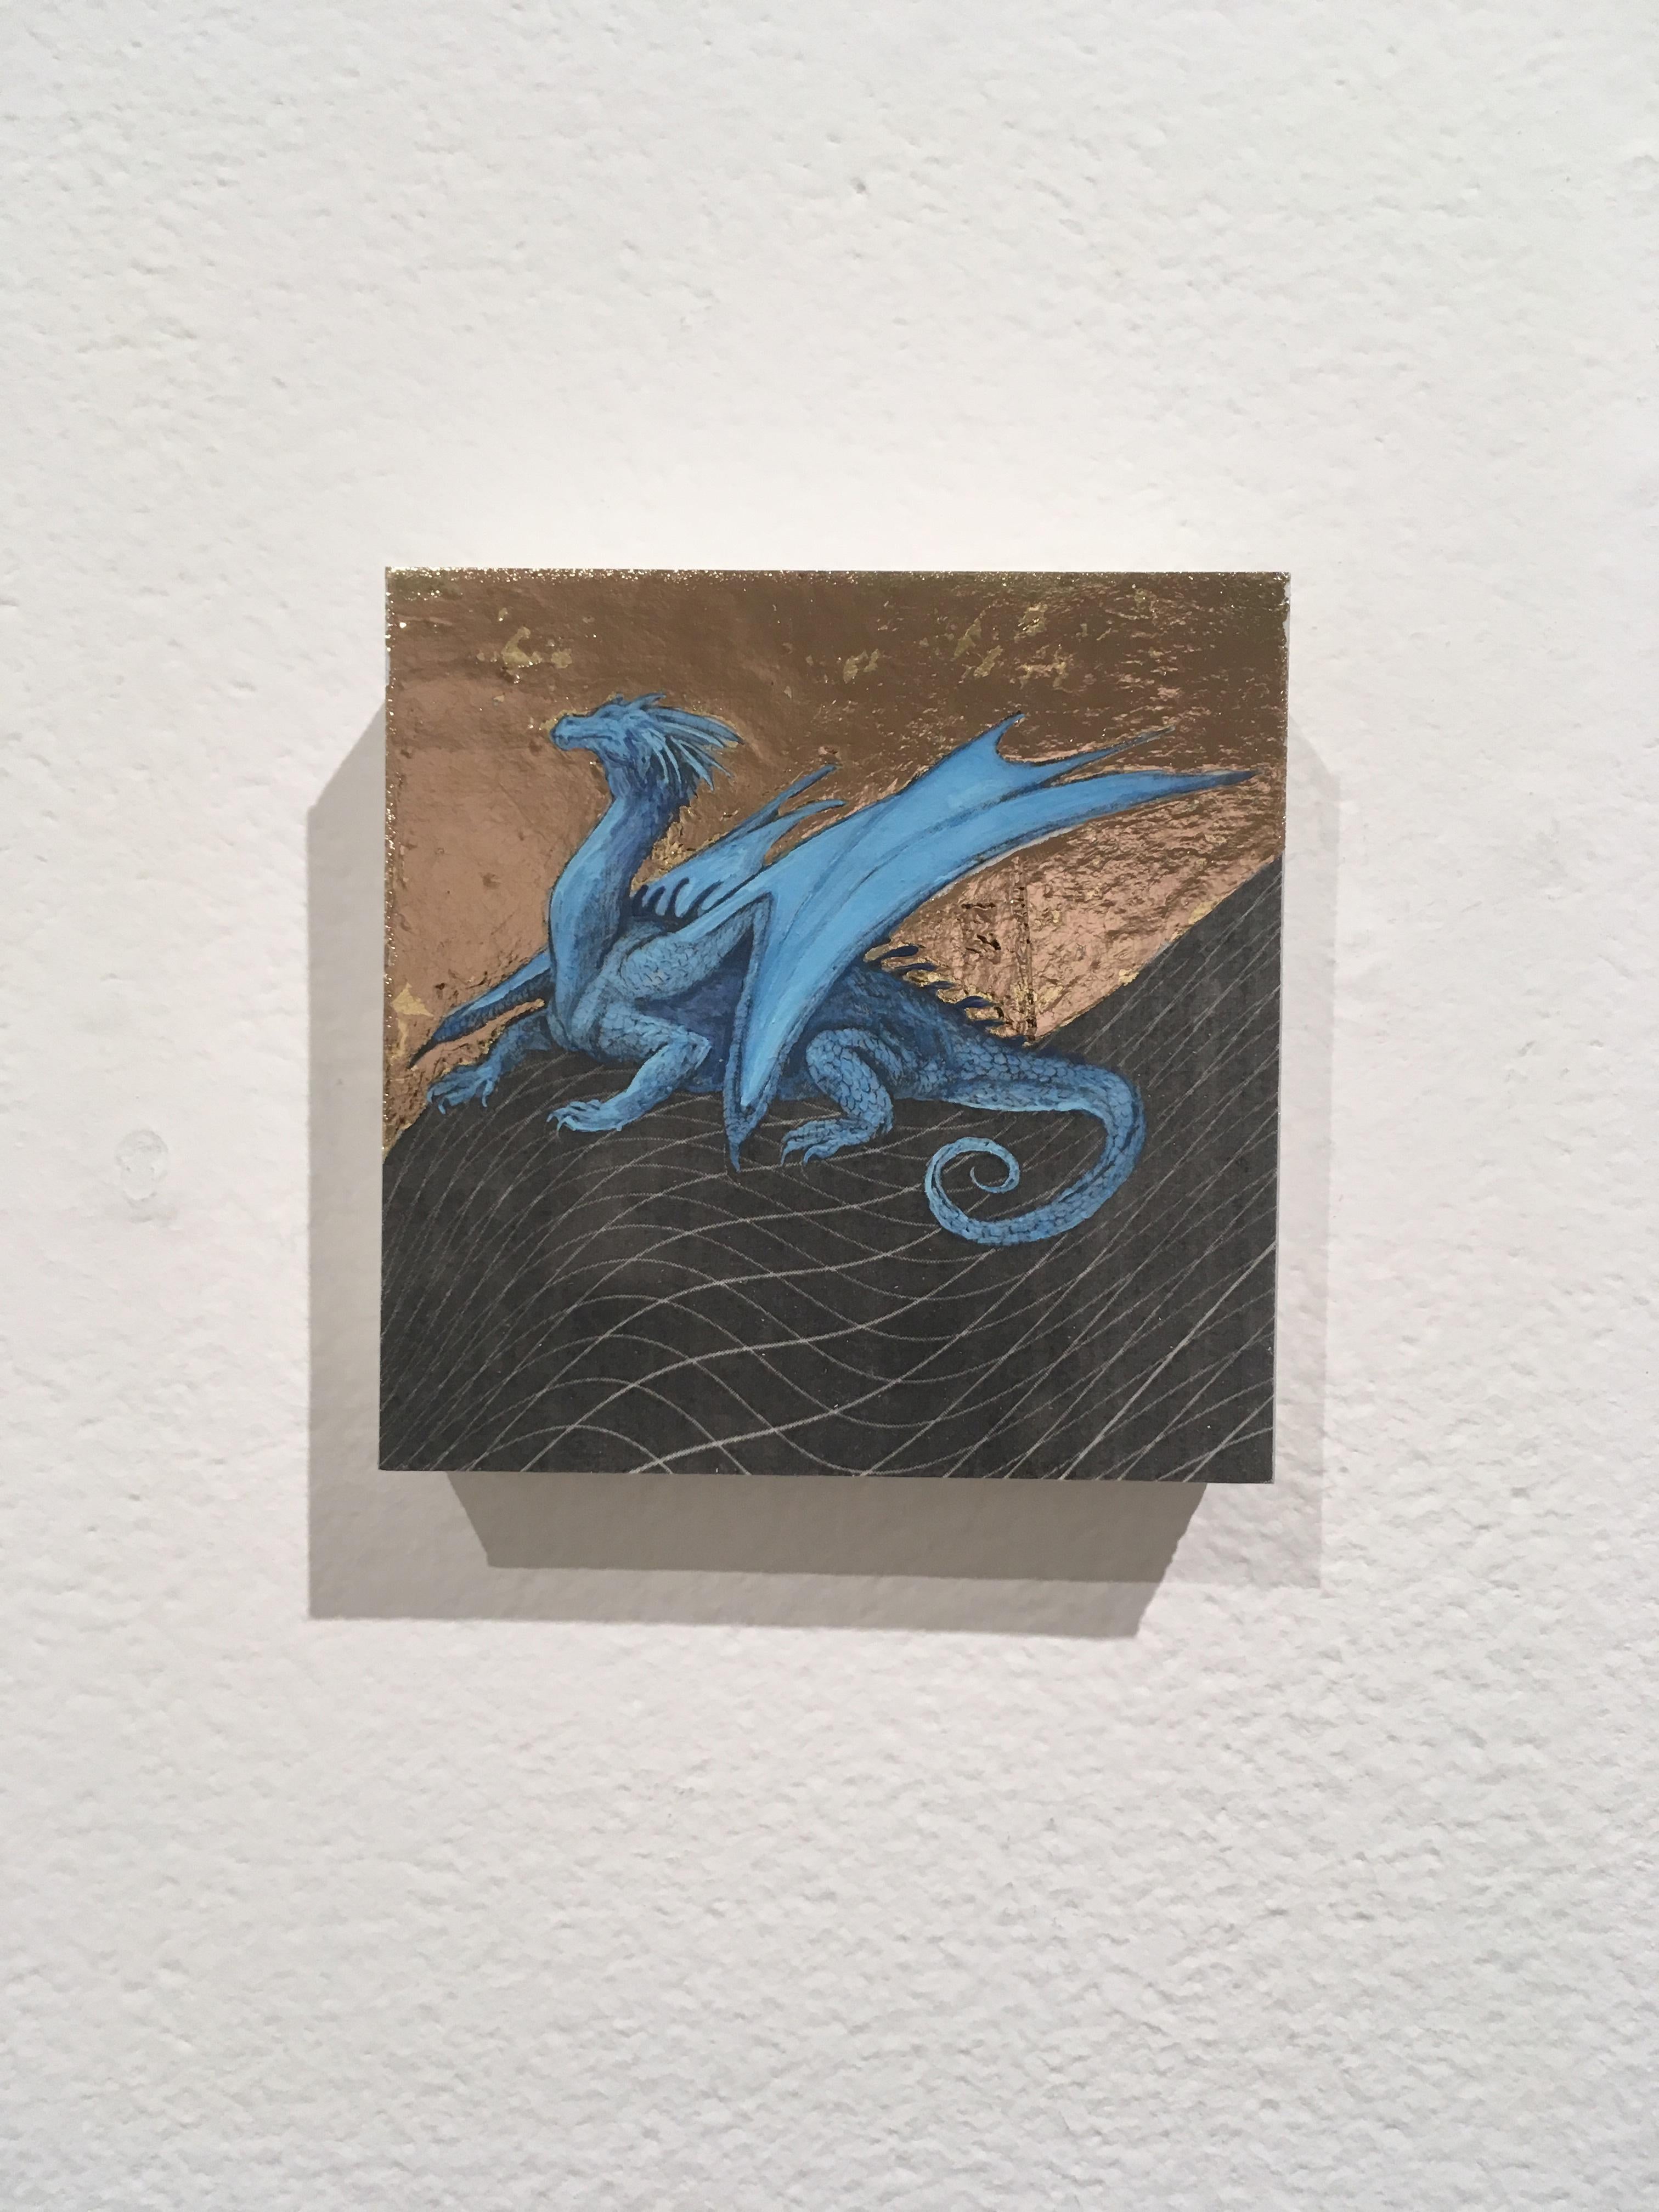 Cerulean Dragon, oil, metal foil, wood, mythical creature, figurative, animal  - Contemporary Mixed Media Art by Alexis Kandra